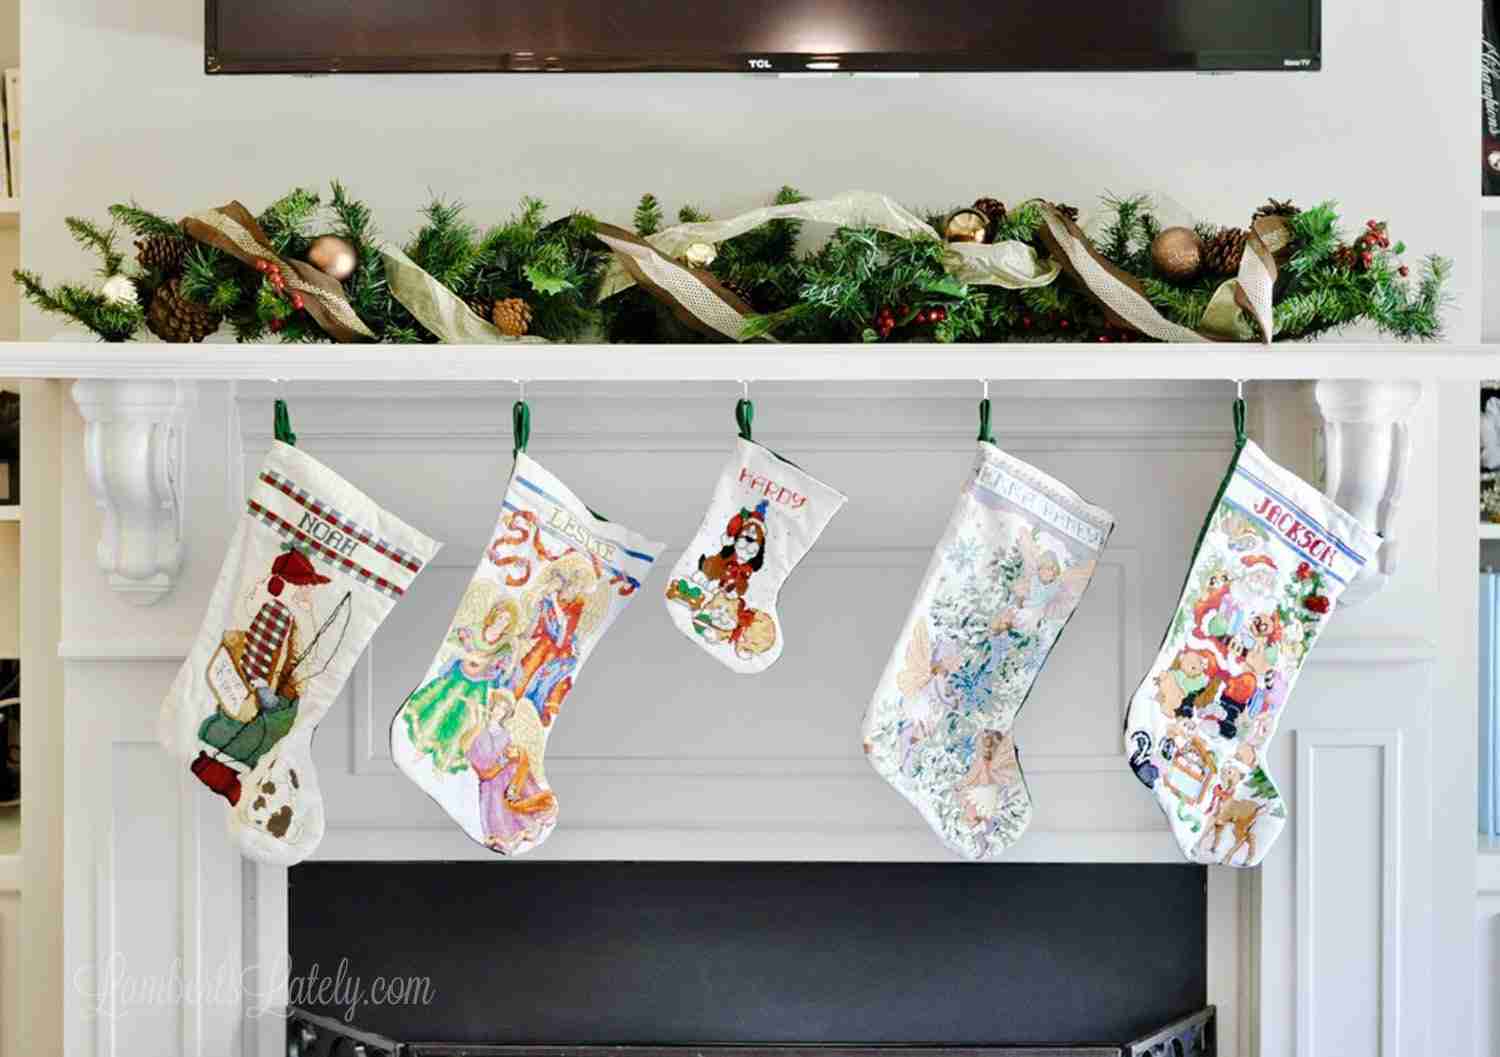 This list of over 100 cheap stocking stuffers has lots of ideas for babies, toddlers, adult men, women, teens, and kids (girls & boys). There's even a section of small, inexpensive DIY gifts!